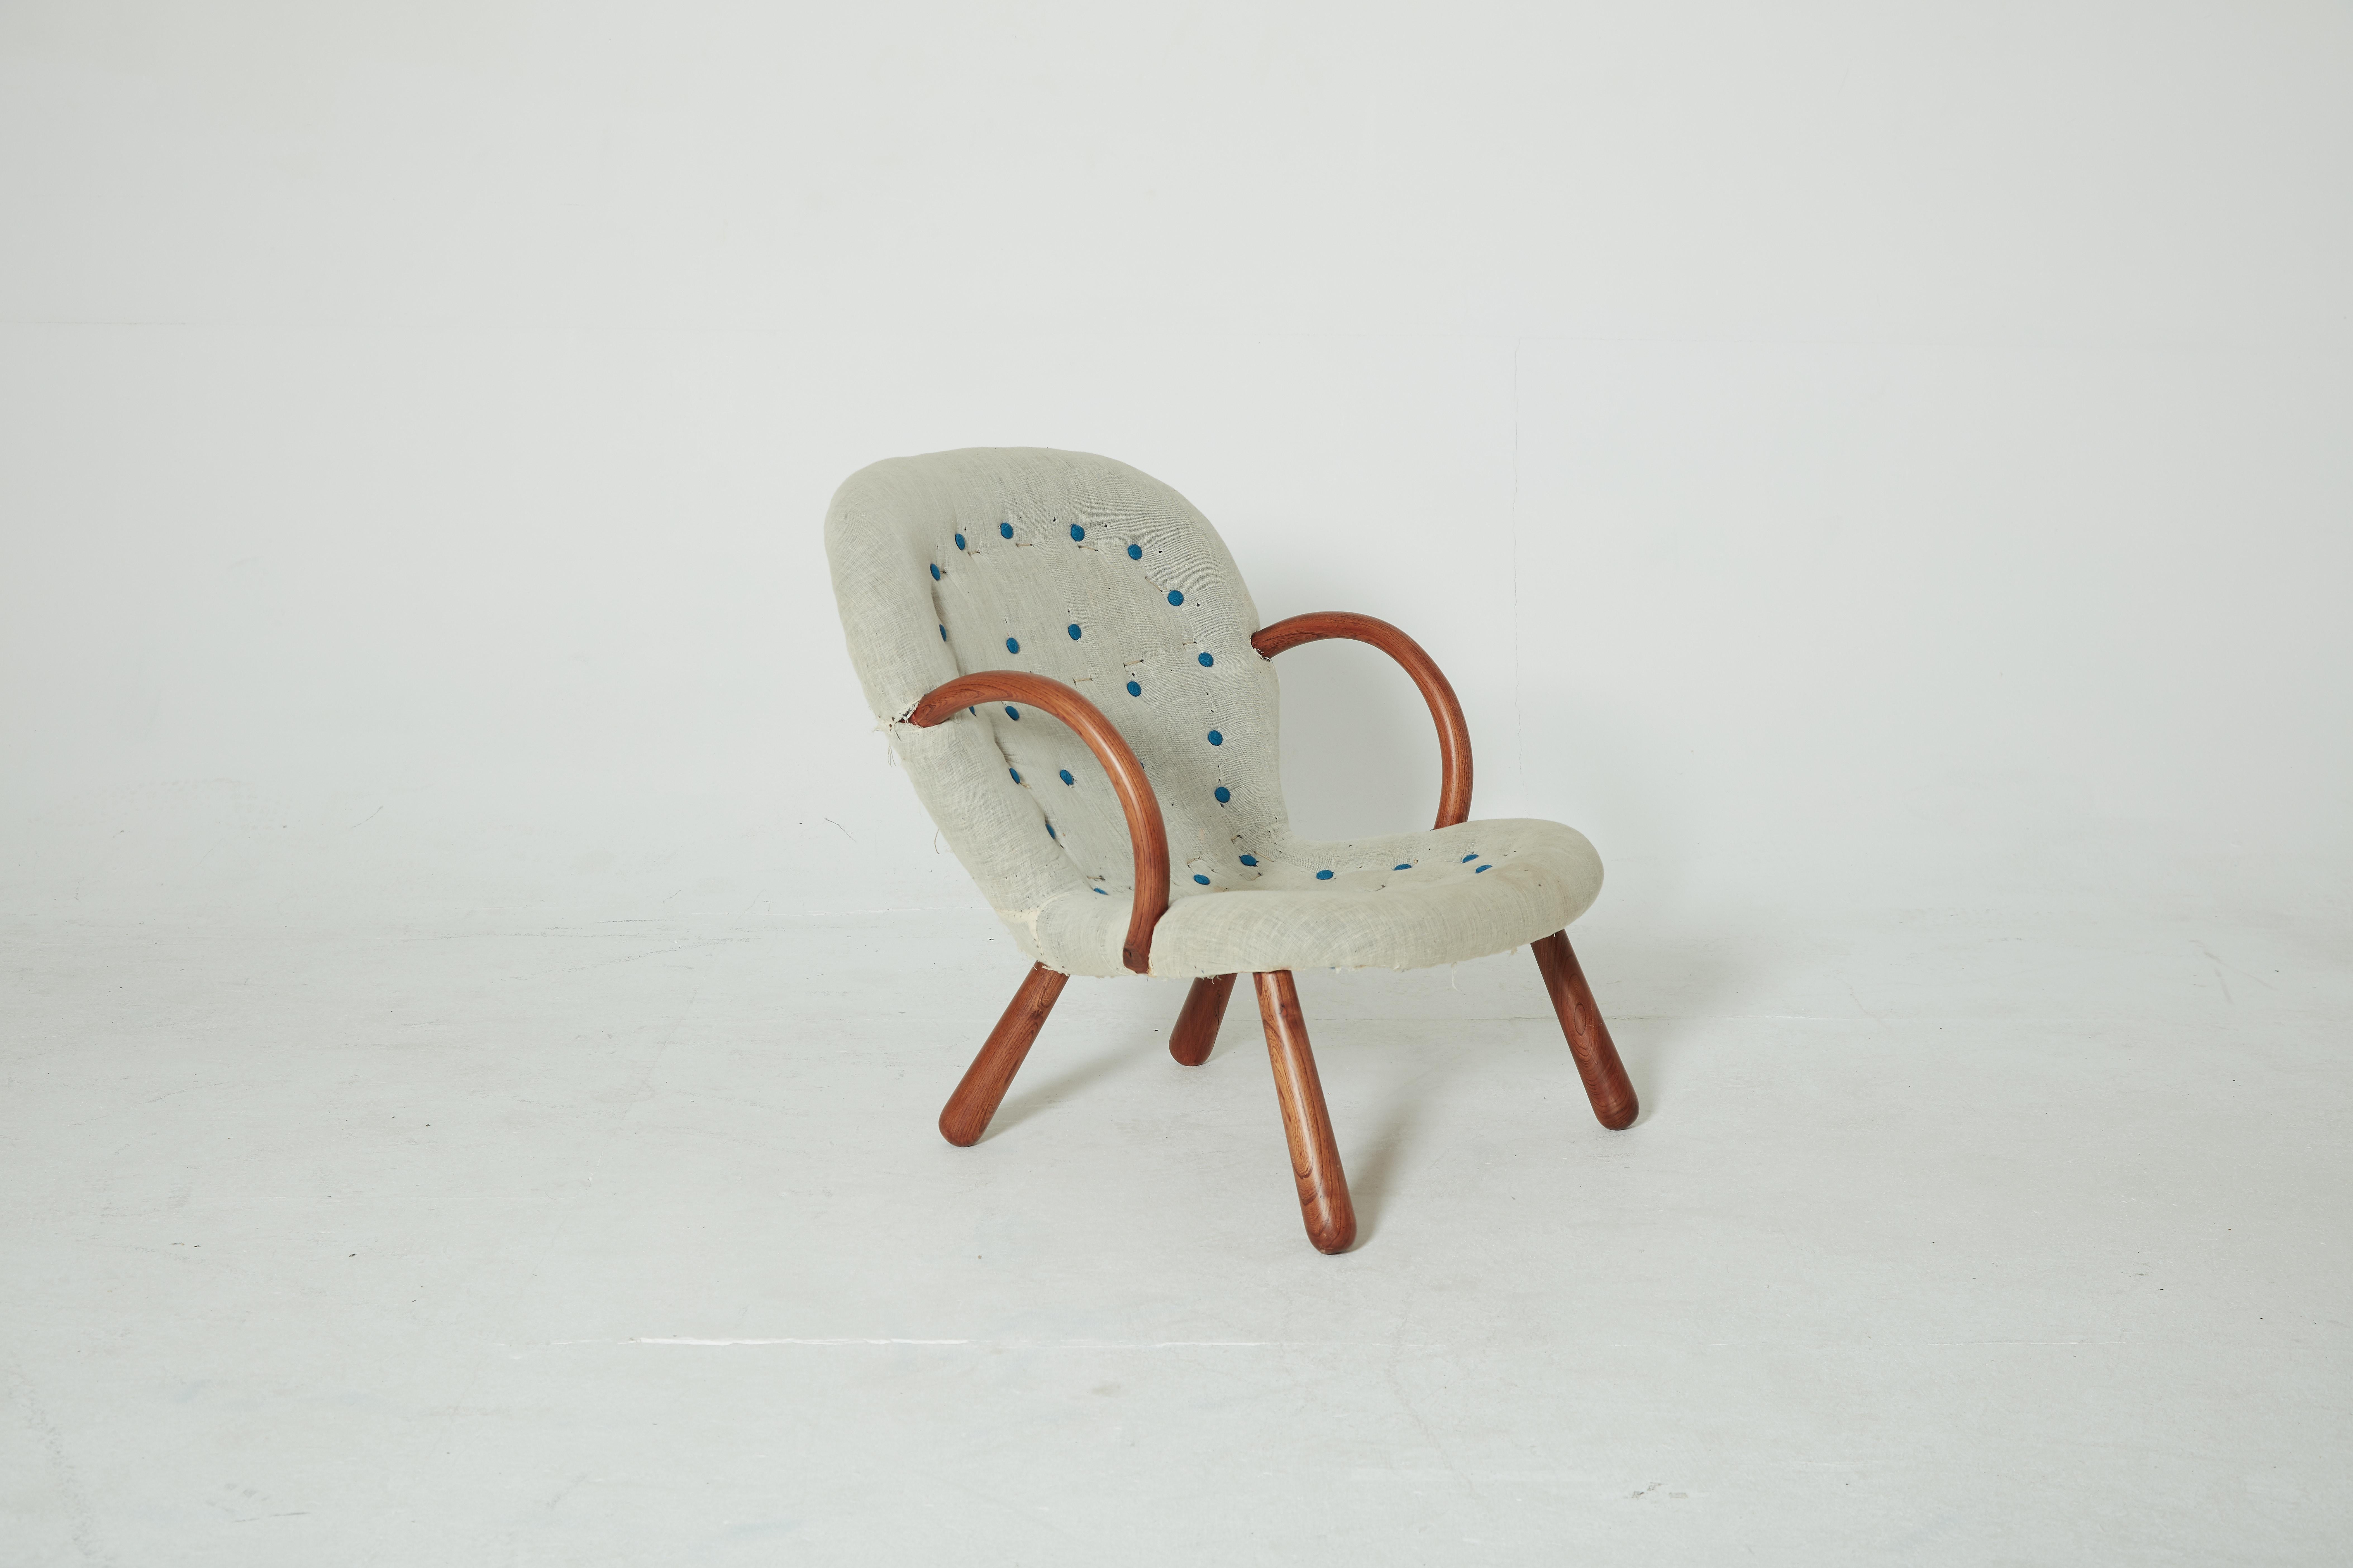 Danish 1940s Philip Arctander Clam Chair with Complimentary Re-Upholstery